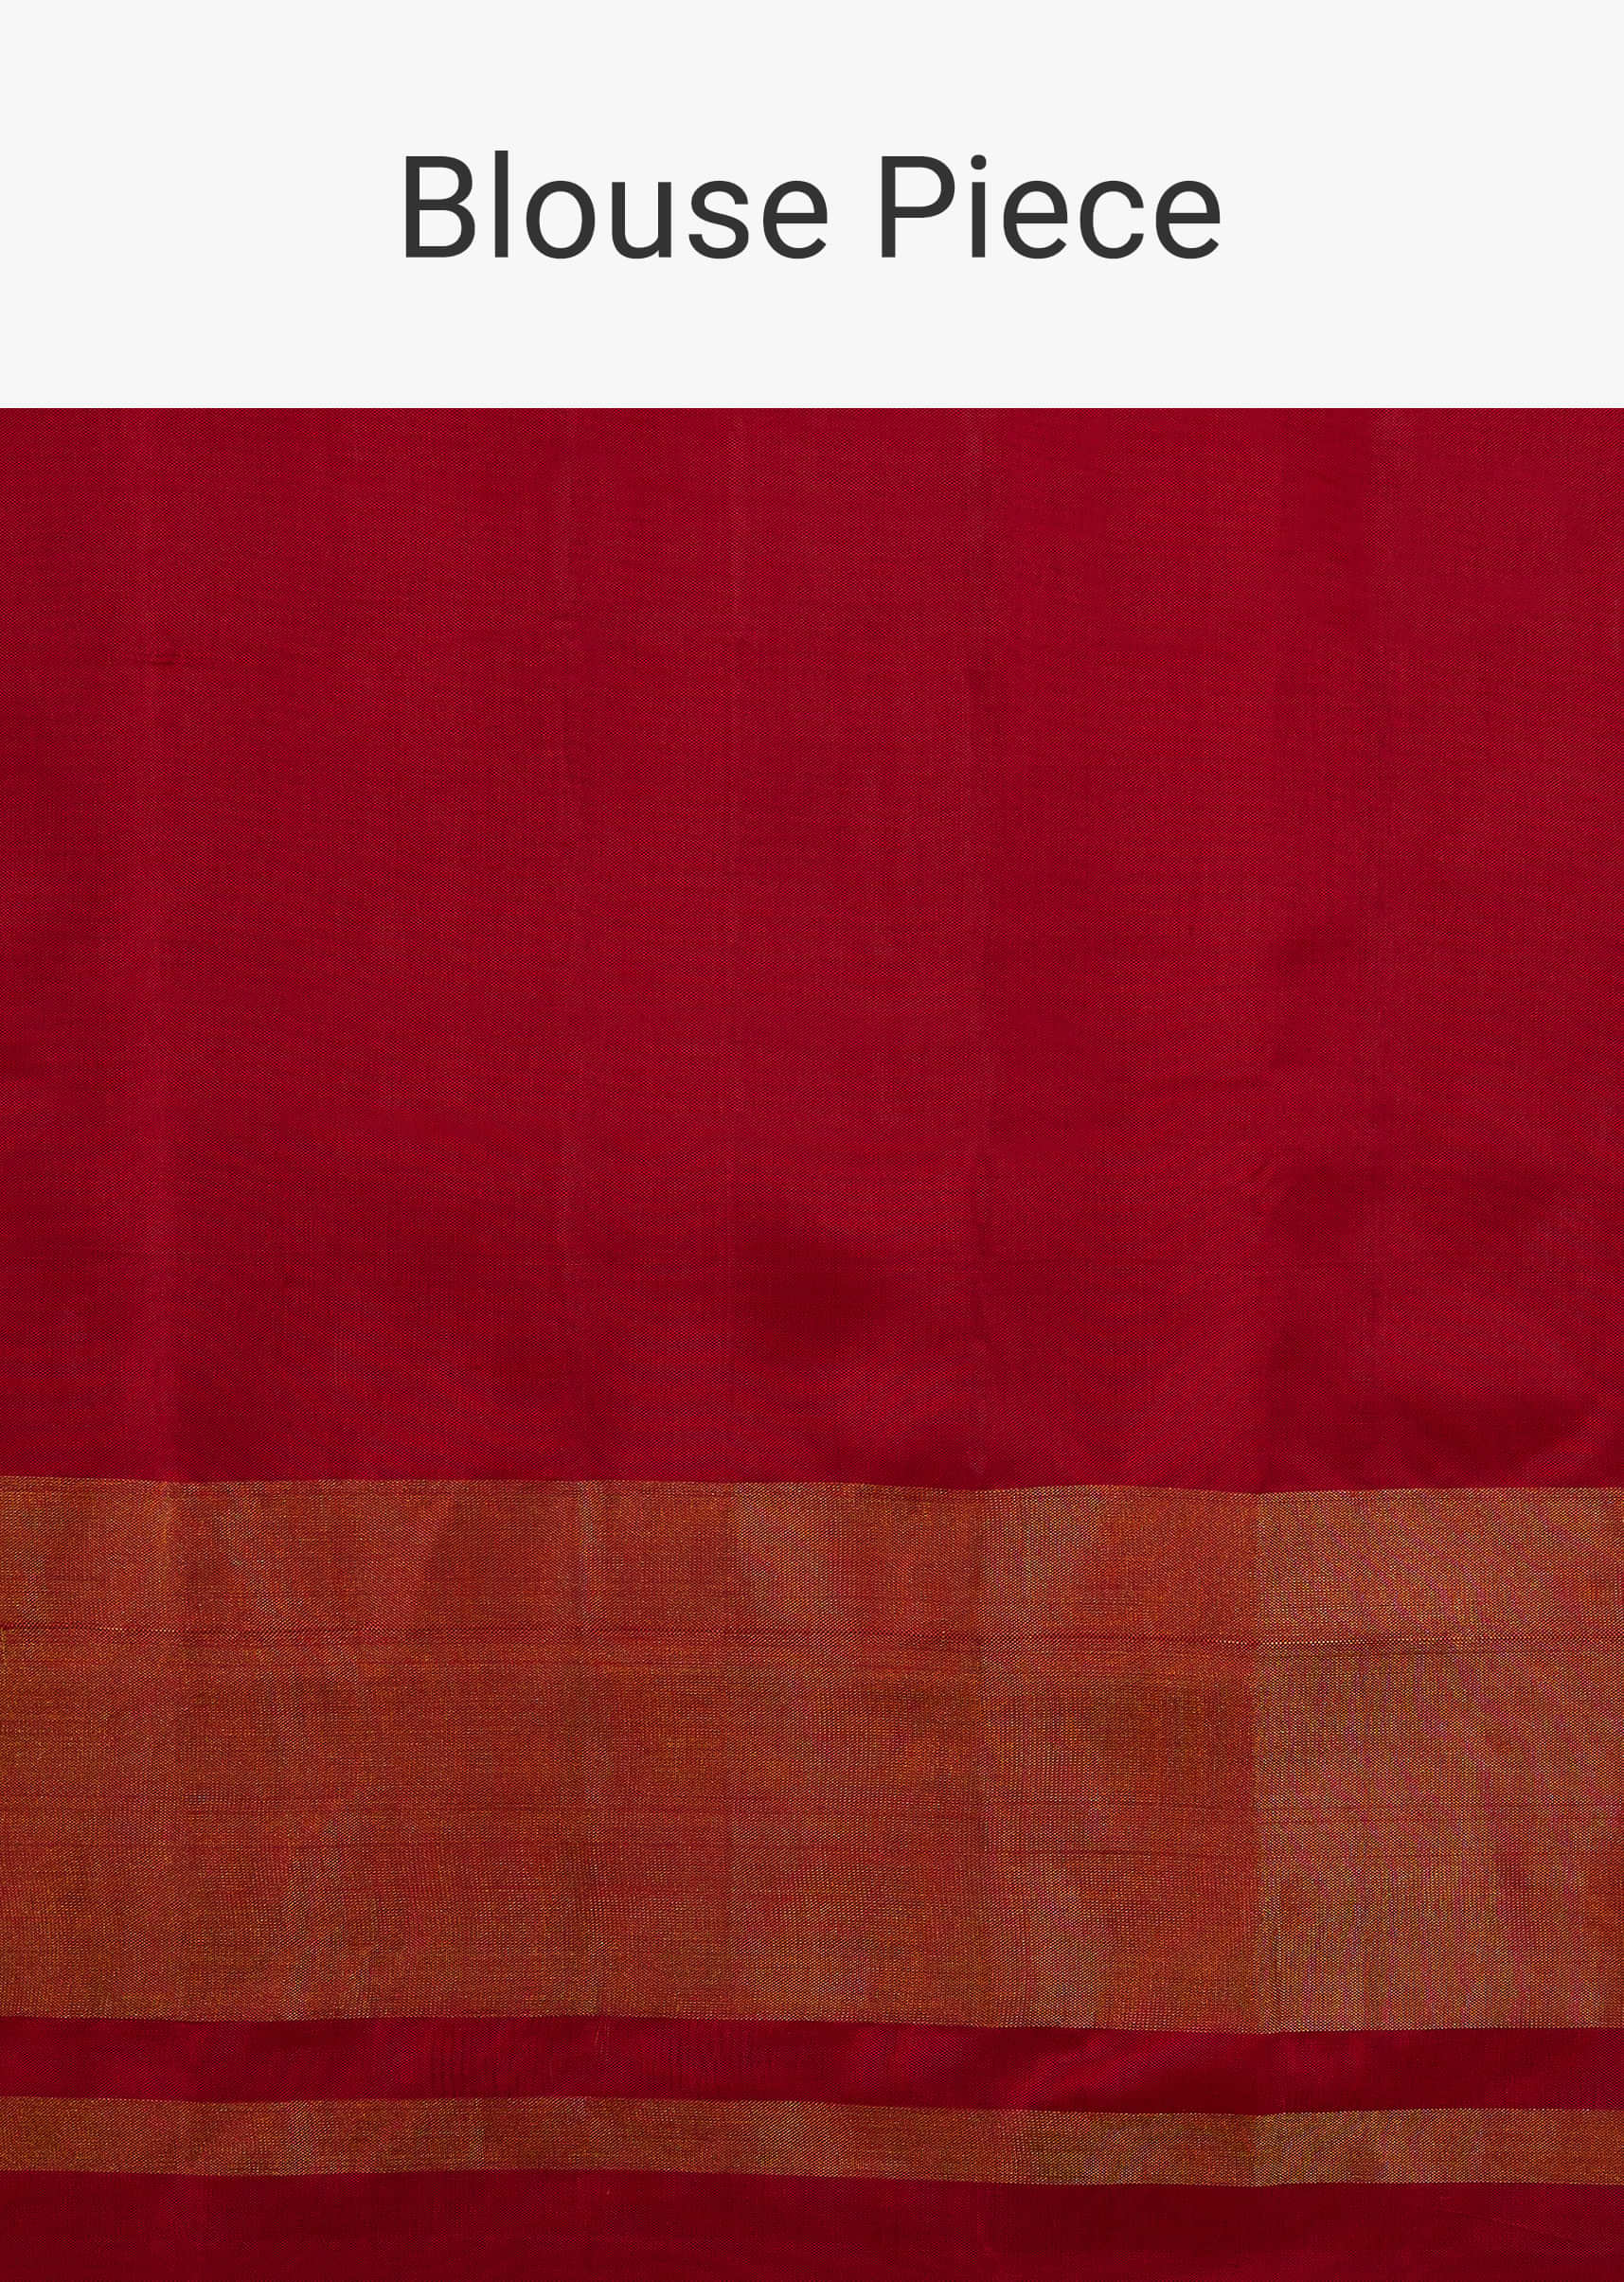 Cherry Red Saree In Silk With Ikat Weave Patola Work